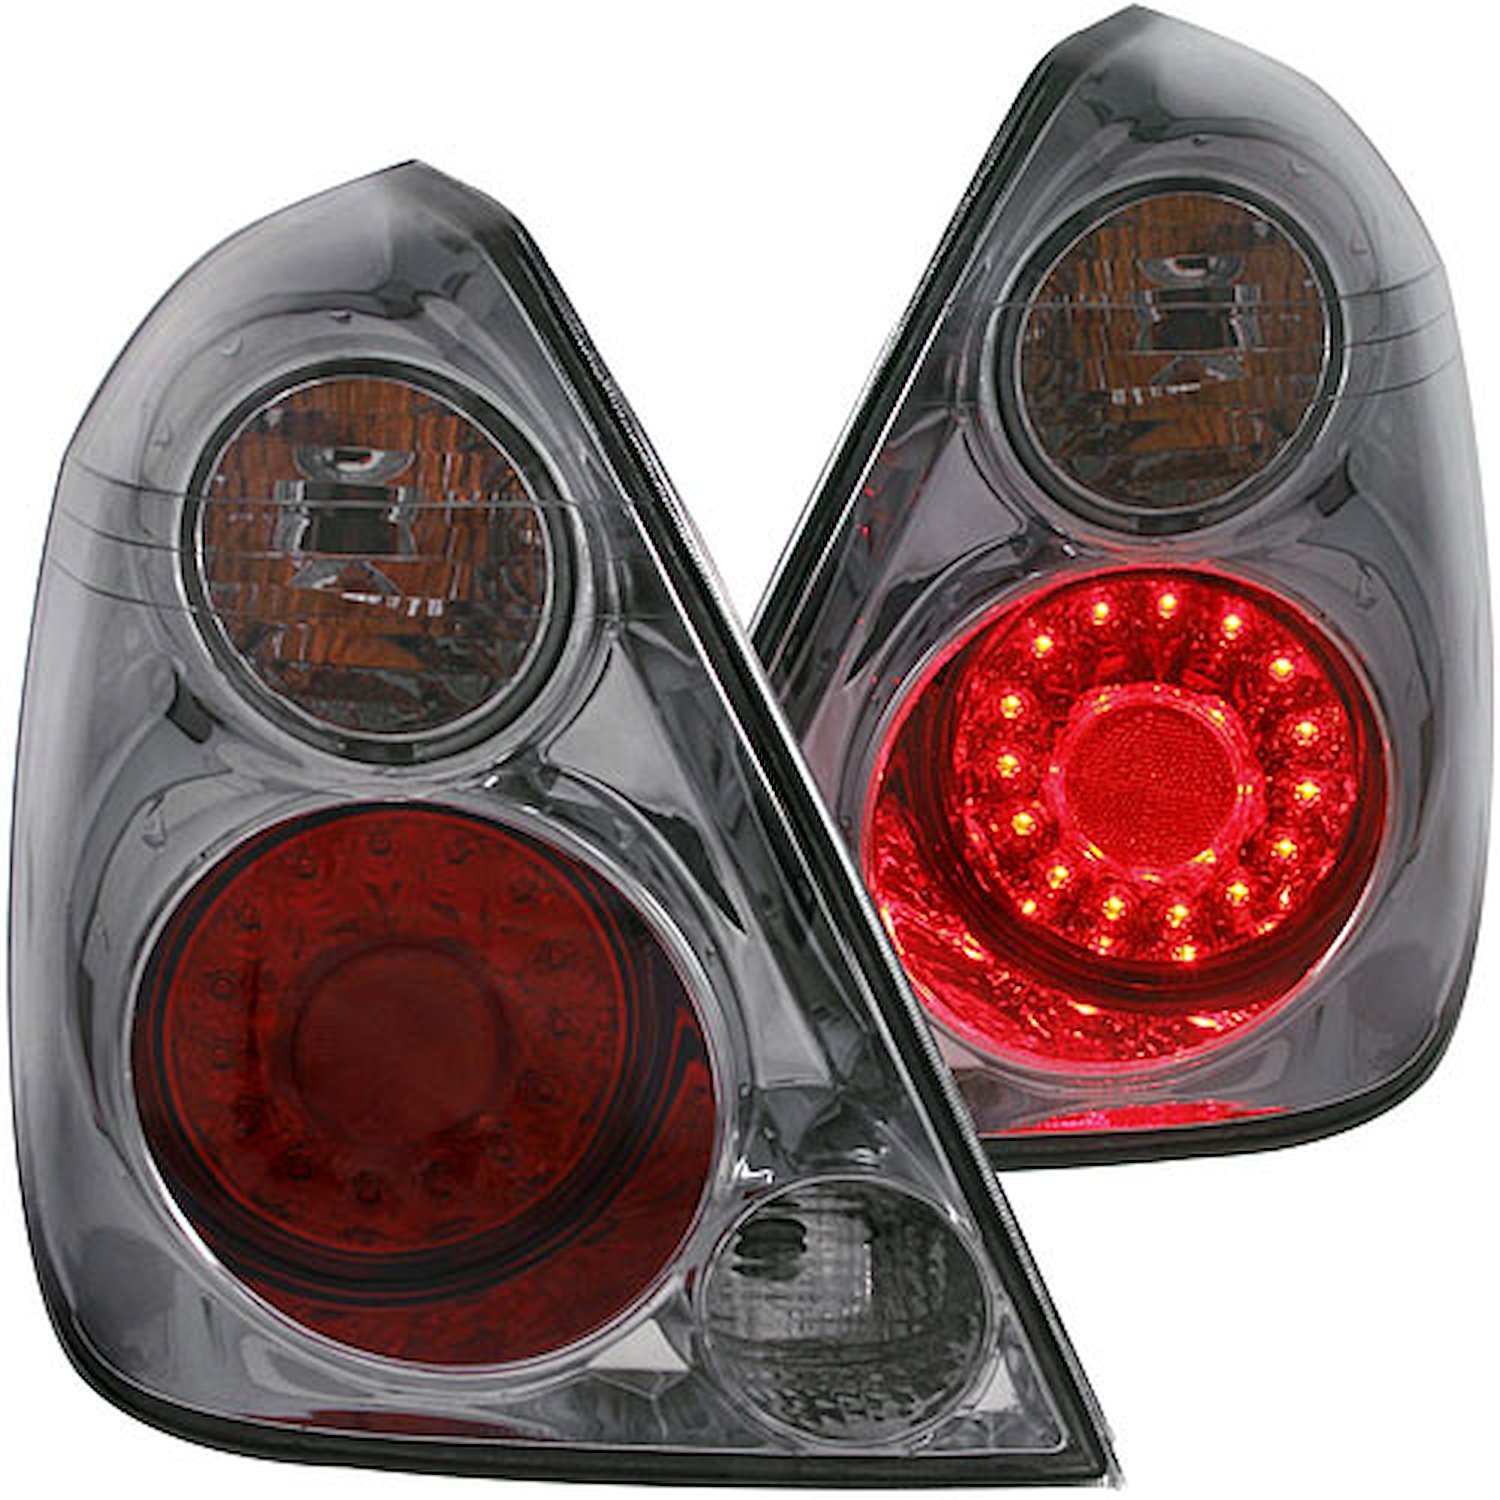 LED Taillights for 2002-2006 Nissan Altima